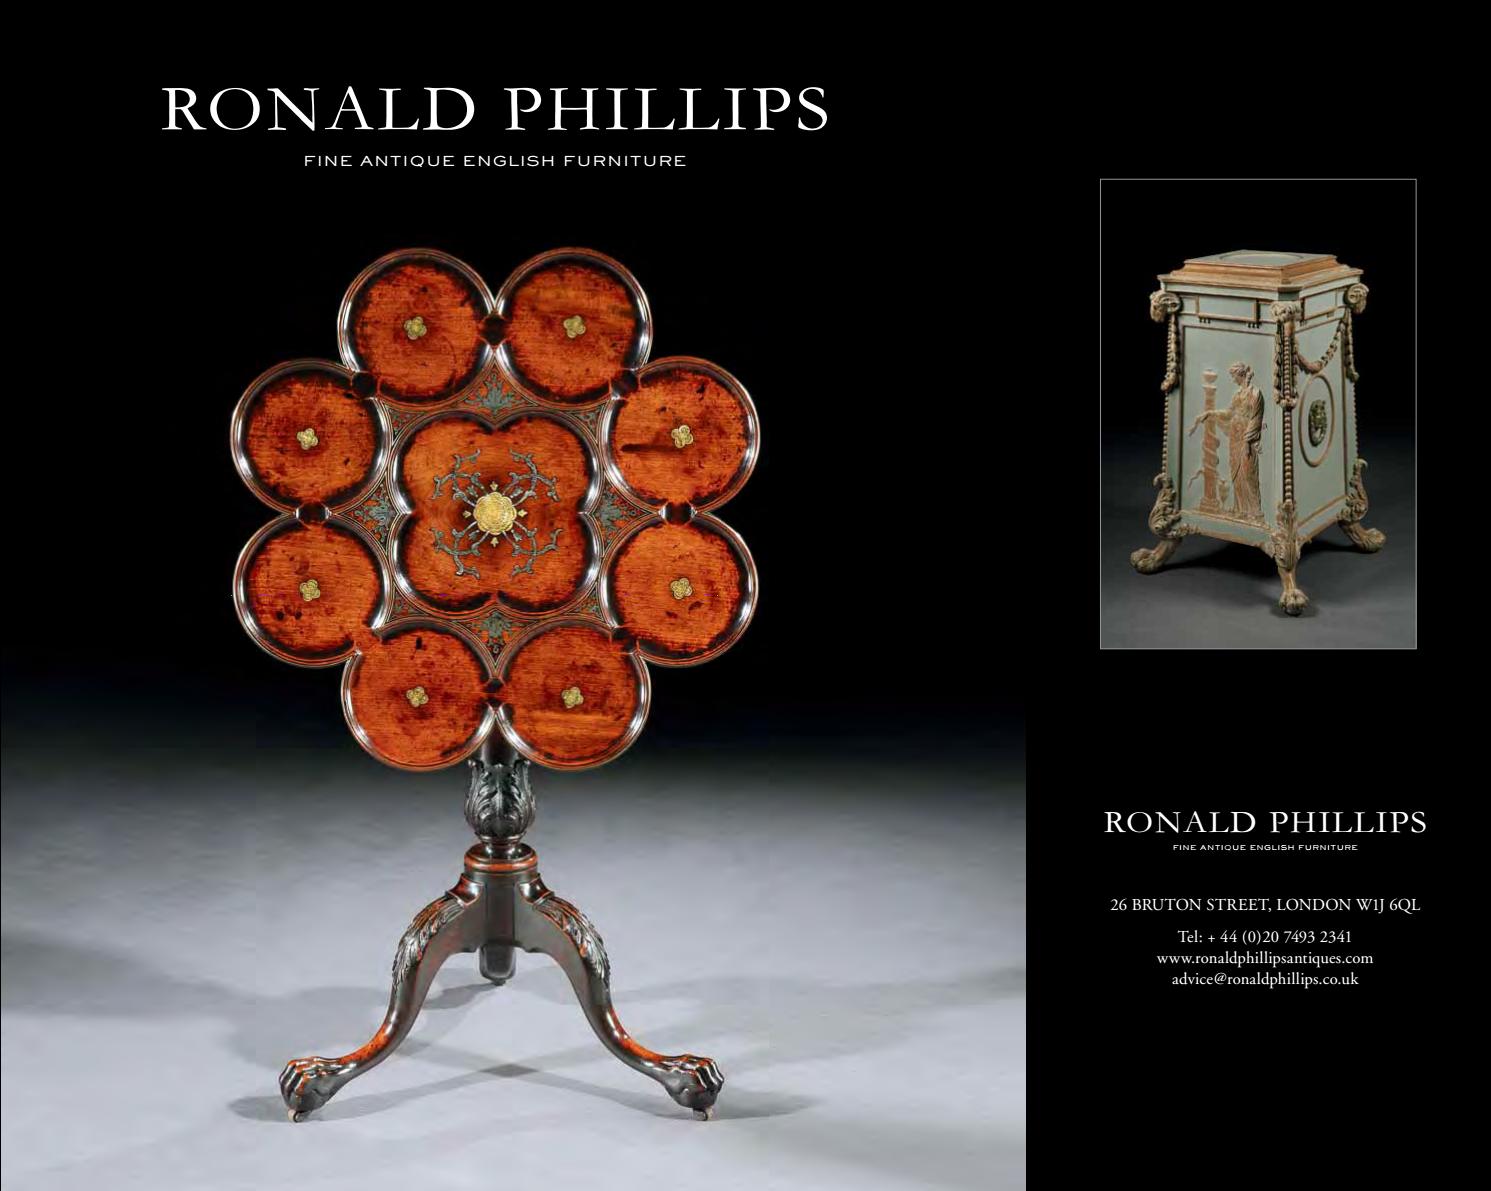 Mobilier De France tours Charmant Ronald Phillips 2019 by Artsolution Sprl issuu